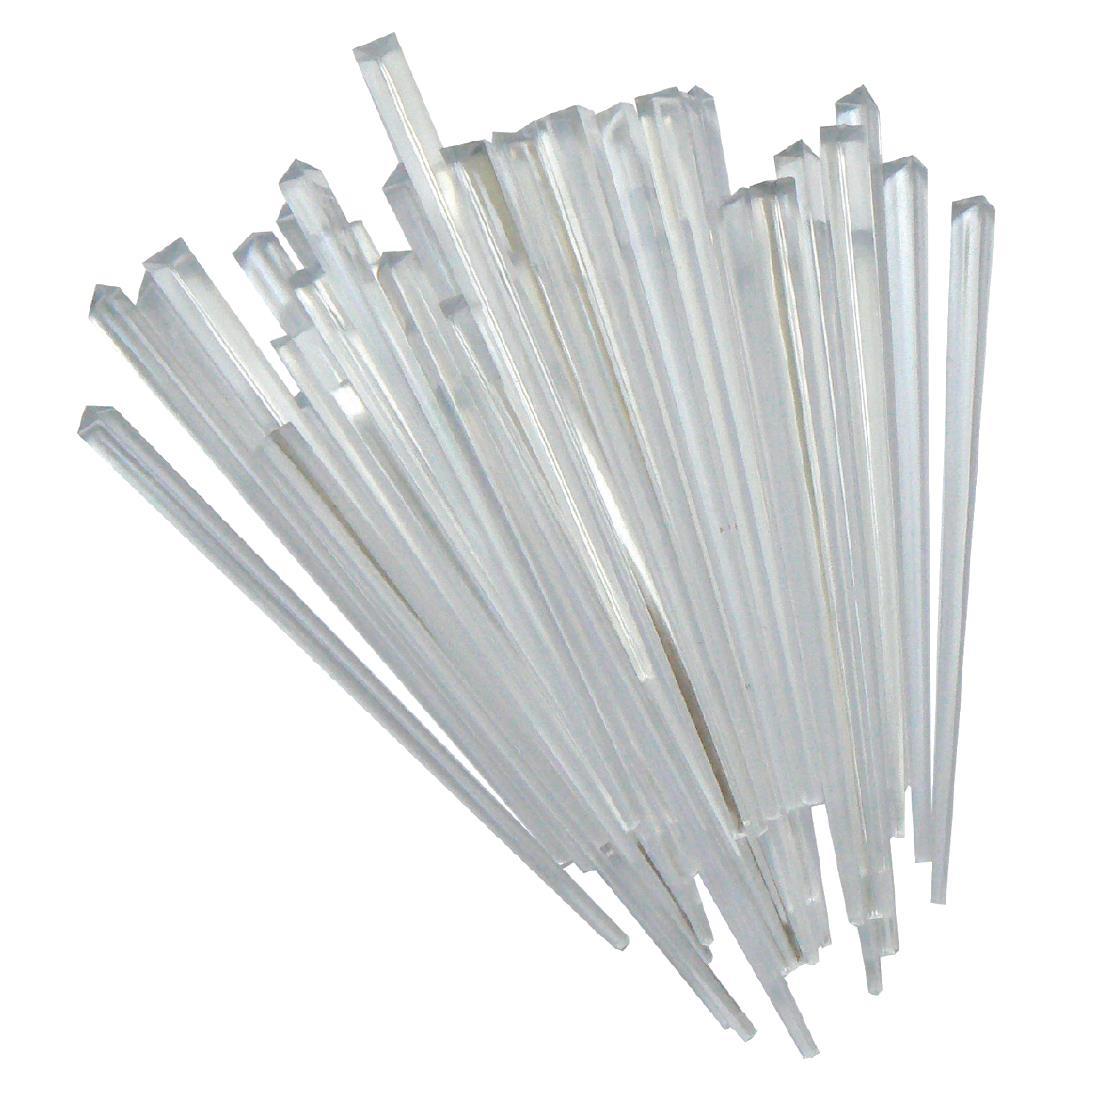 Beaumont Clear Prism Sticks (Pack of 1000) - DF144  - 1